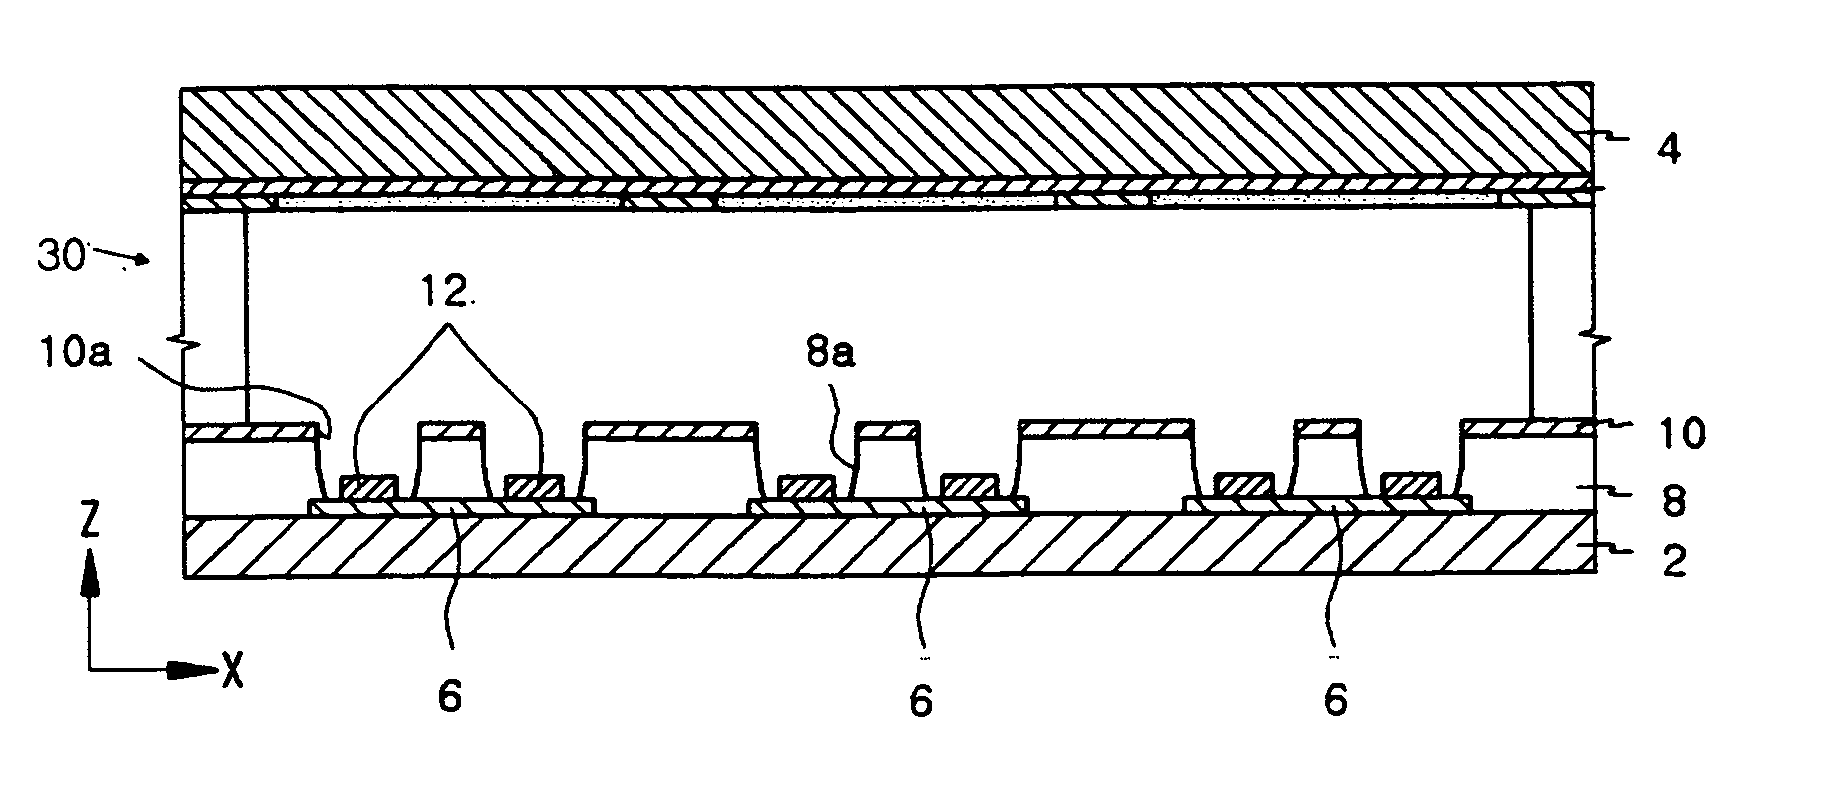 Composition for forming an electron emission source for use in an electron emission device and an electron emission source prepared therefrom